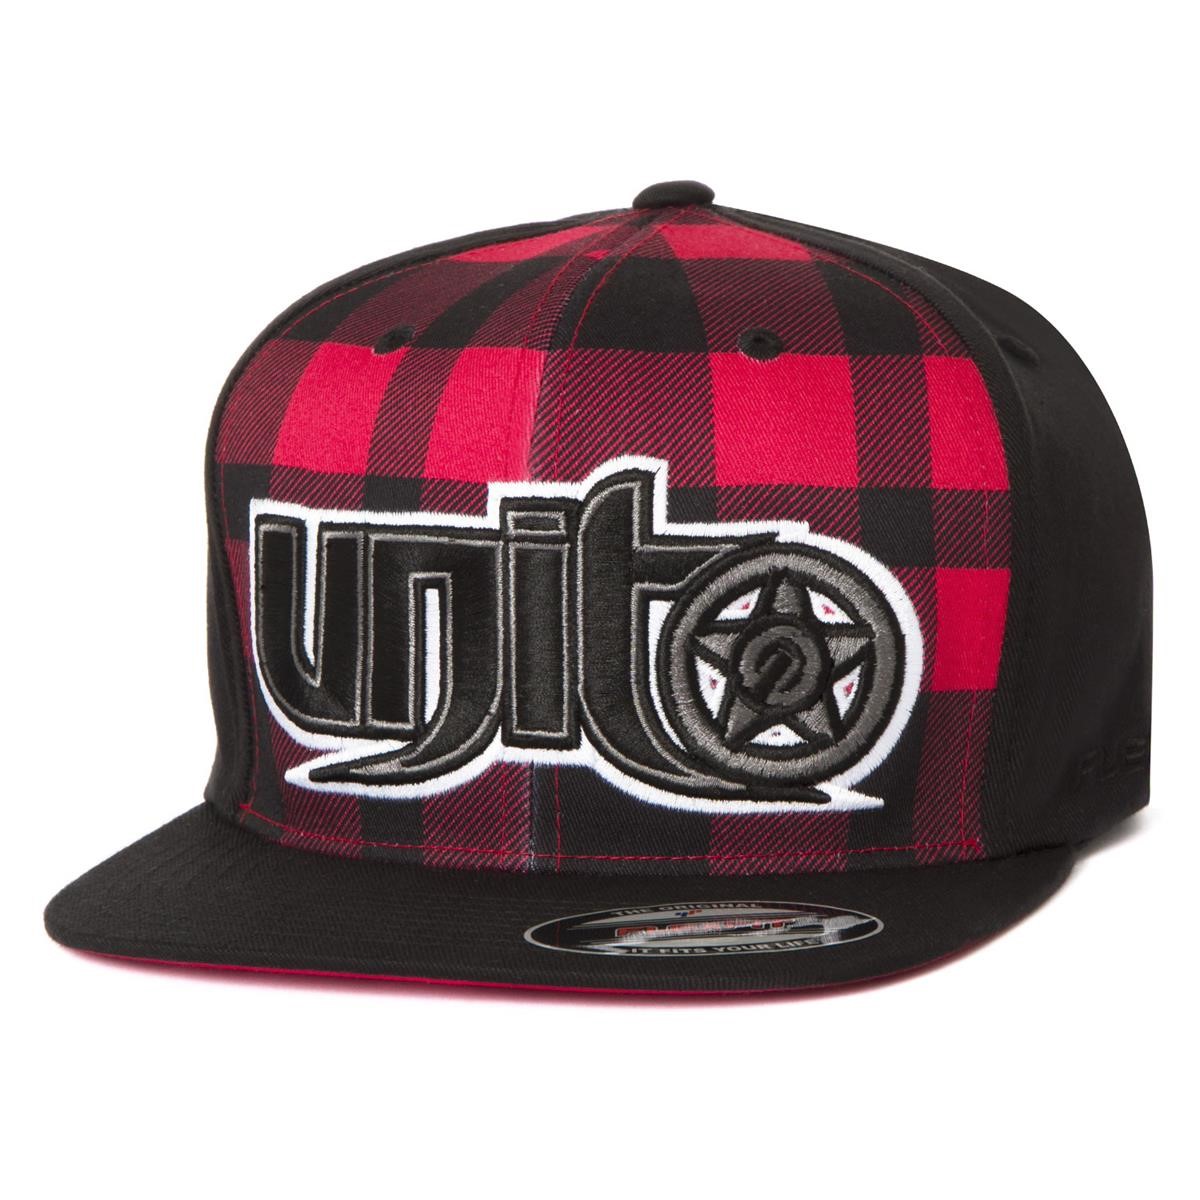 Unit Cap Checkers Red